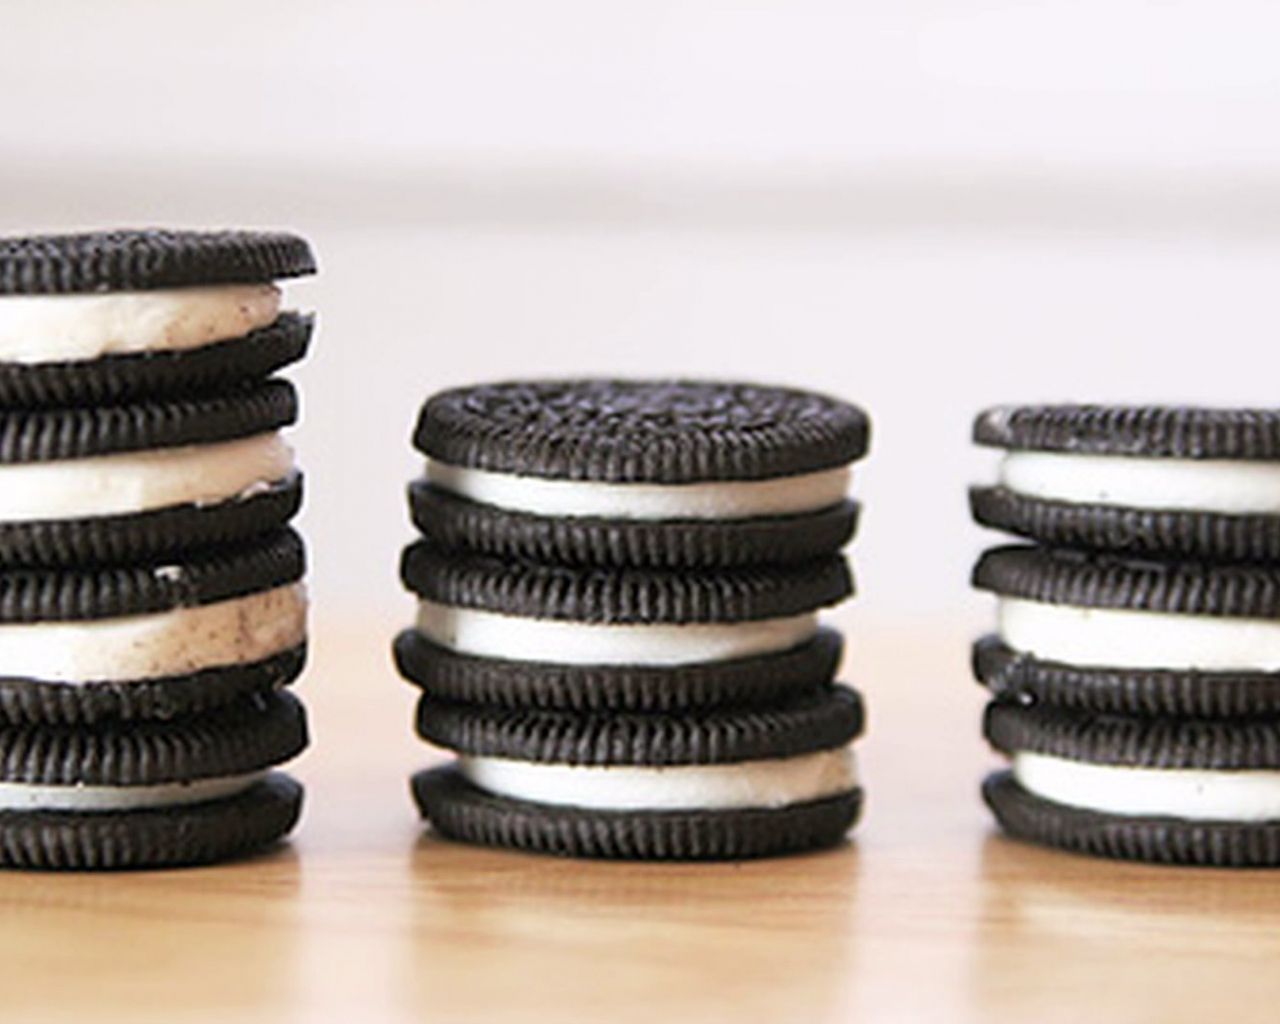 Three stacks of Oreo cookies, with the cookies sandwiching white cream, are stacked on a wooden table. - Oreo